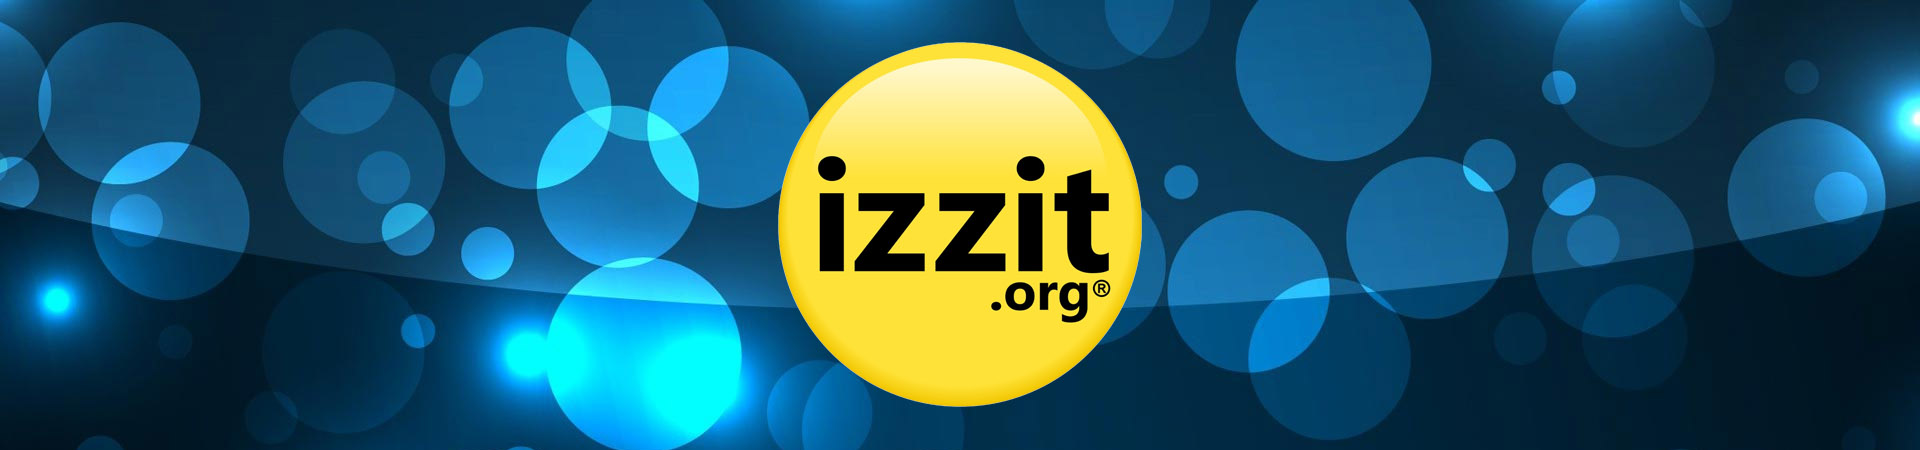 Image for izzit.org